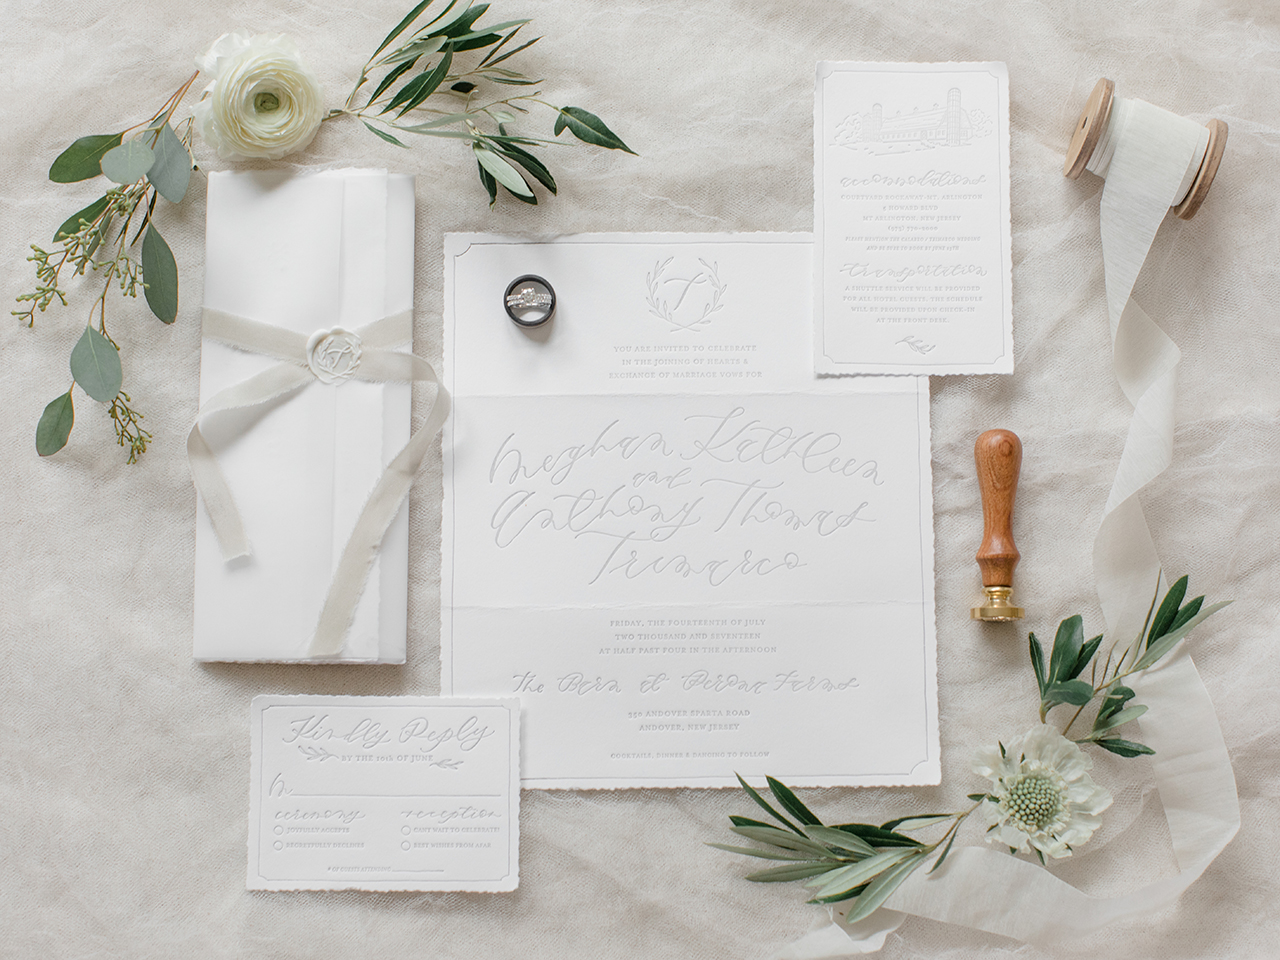 Romantic Gray Calligraphy Wedding Invitations with Deckled Edges by 200 Spring